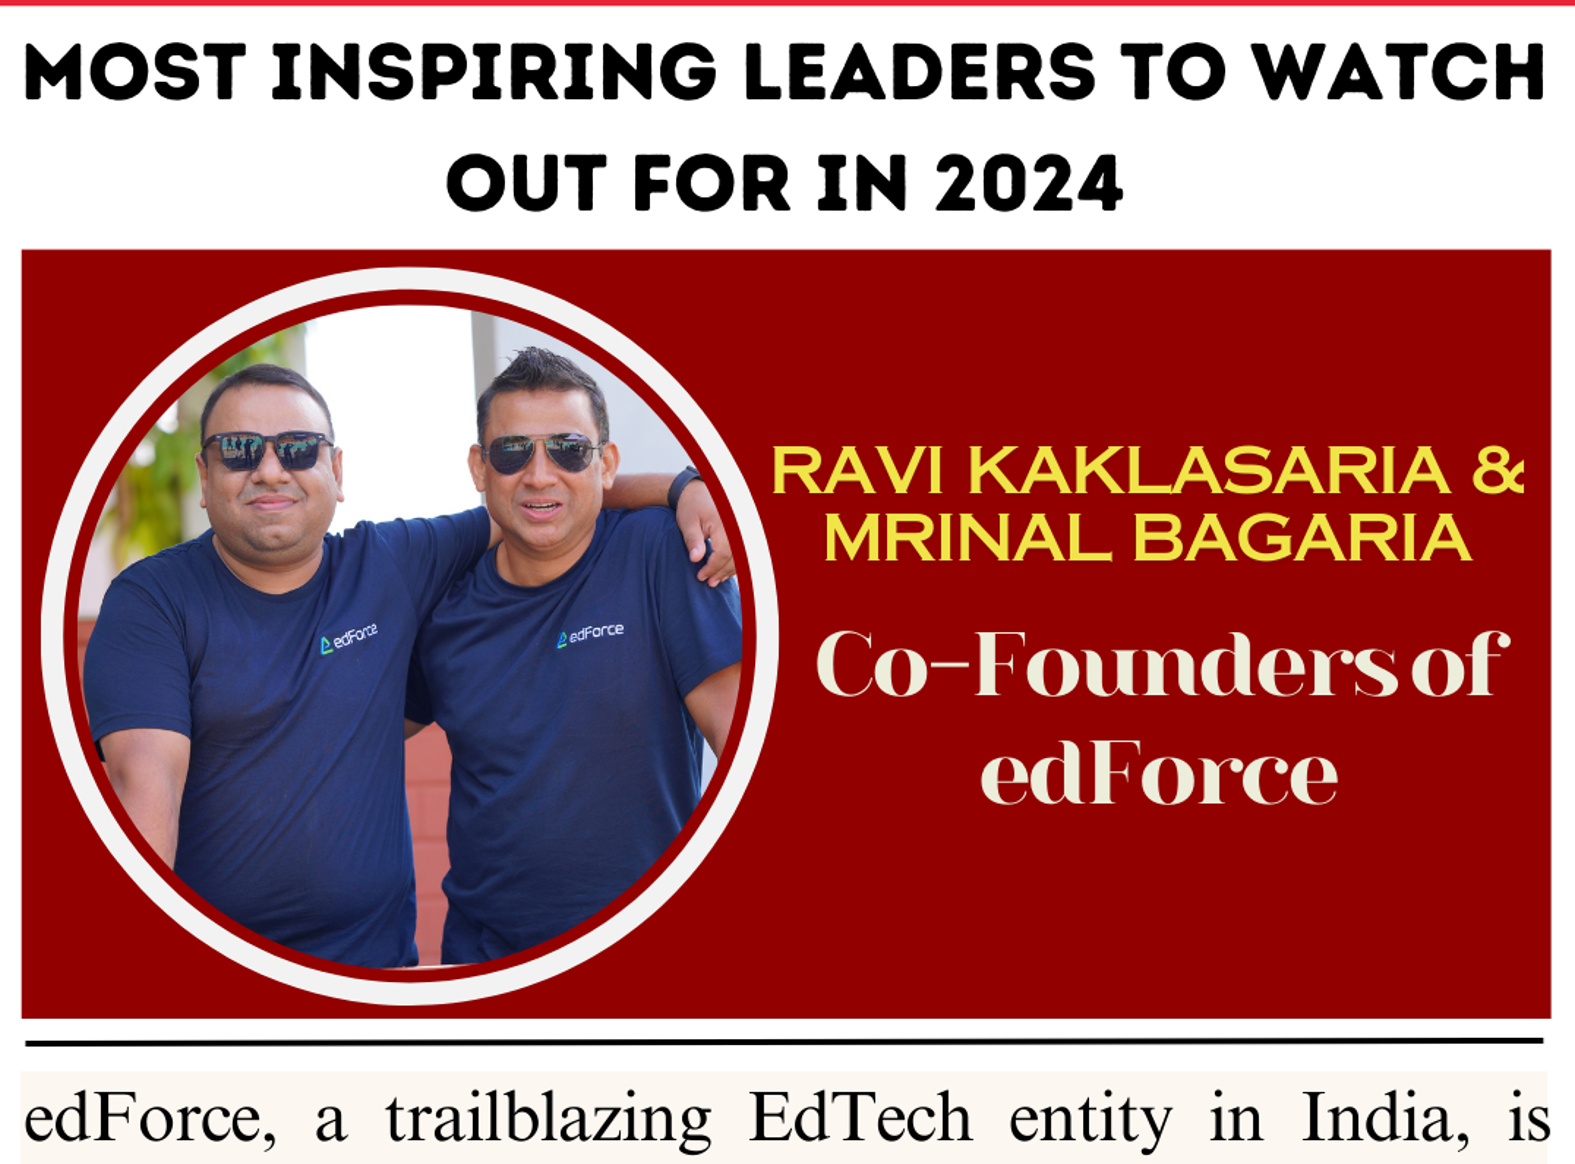 Most Inspiring Leaders to Watch Out for in 2024 awarded to Ravi Kaklasaria & Mrinal Bagaria